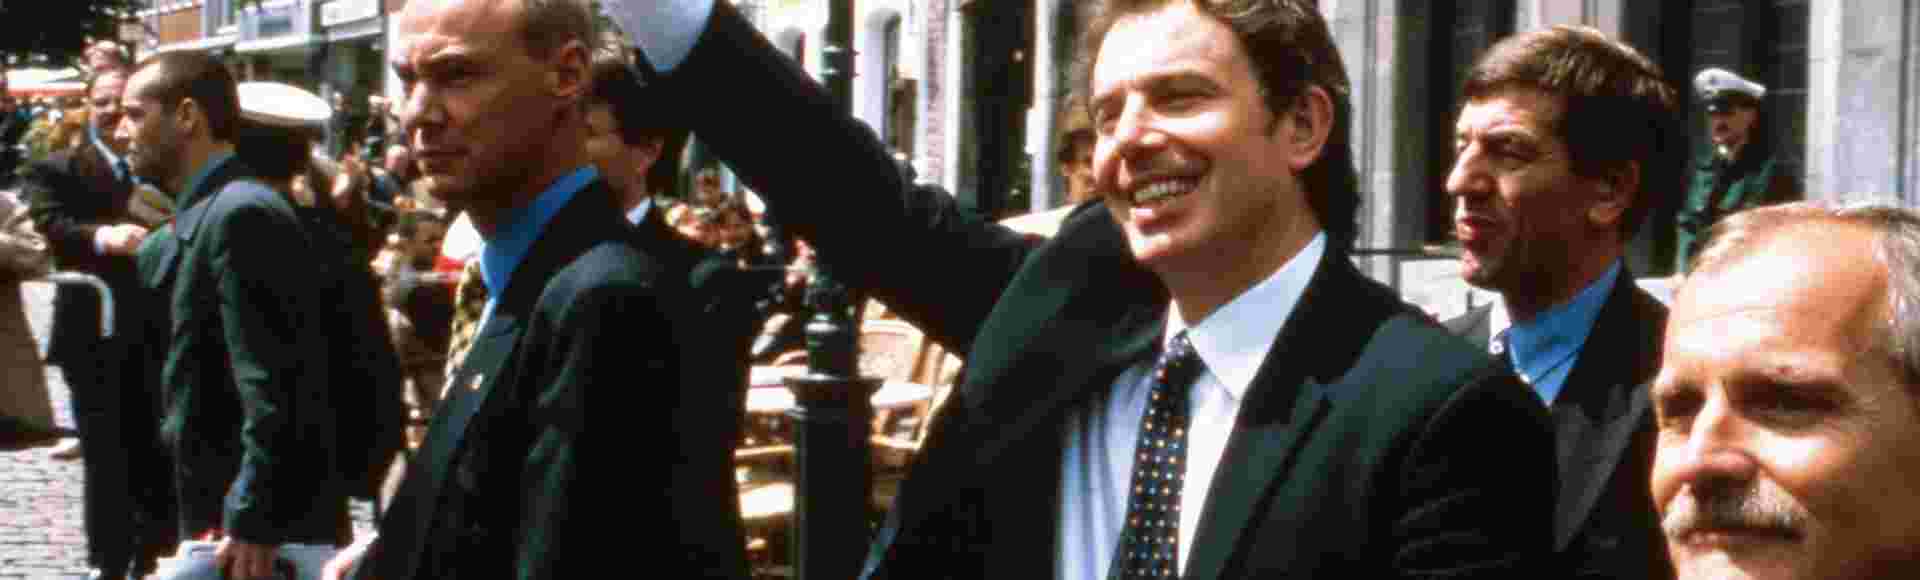 Tony Blair in Germany after receiving the Aachen Peace Prize, 1999.